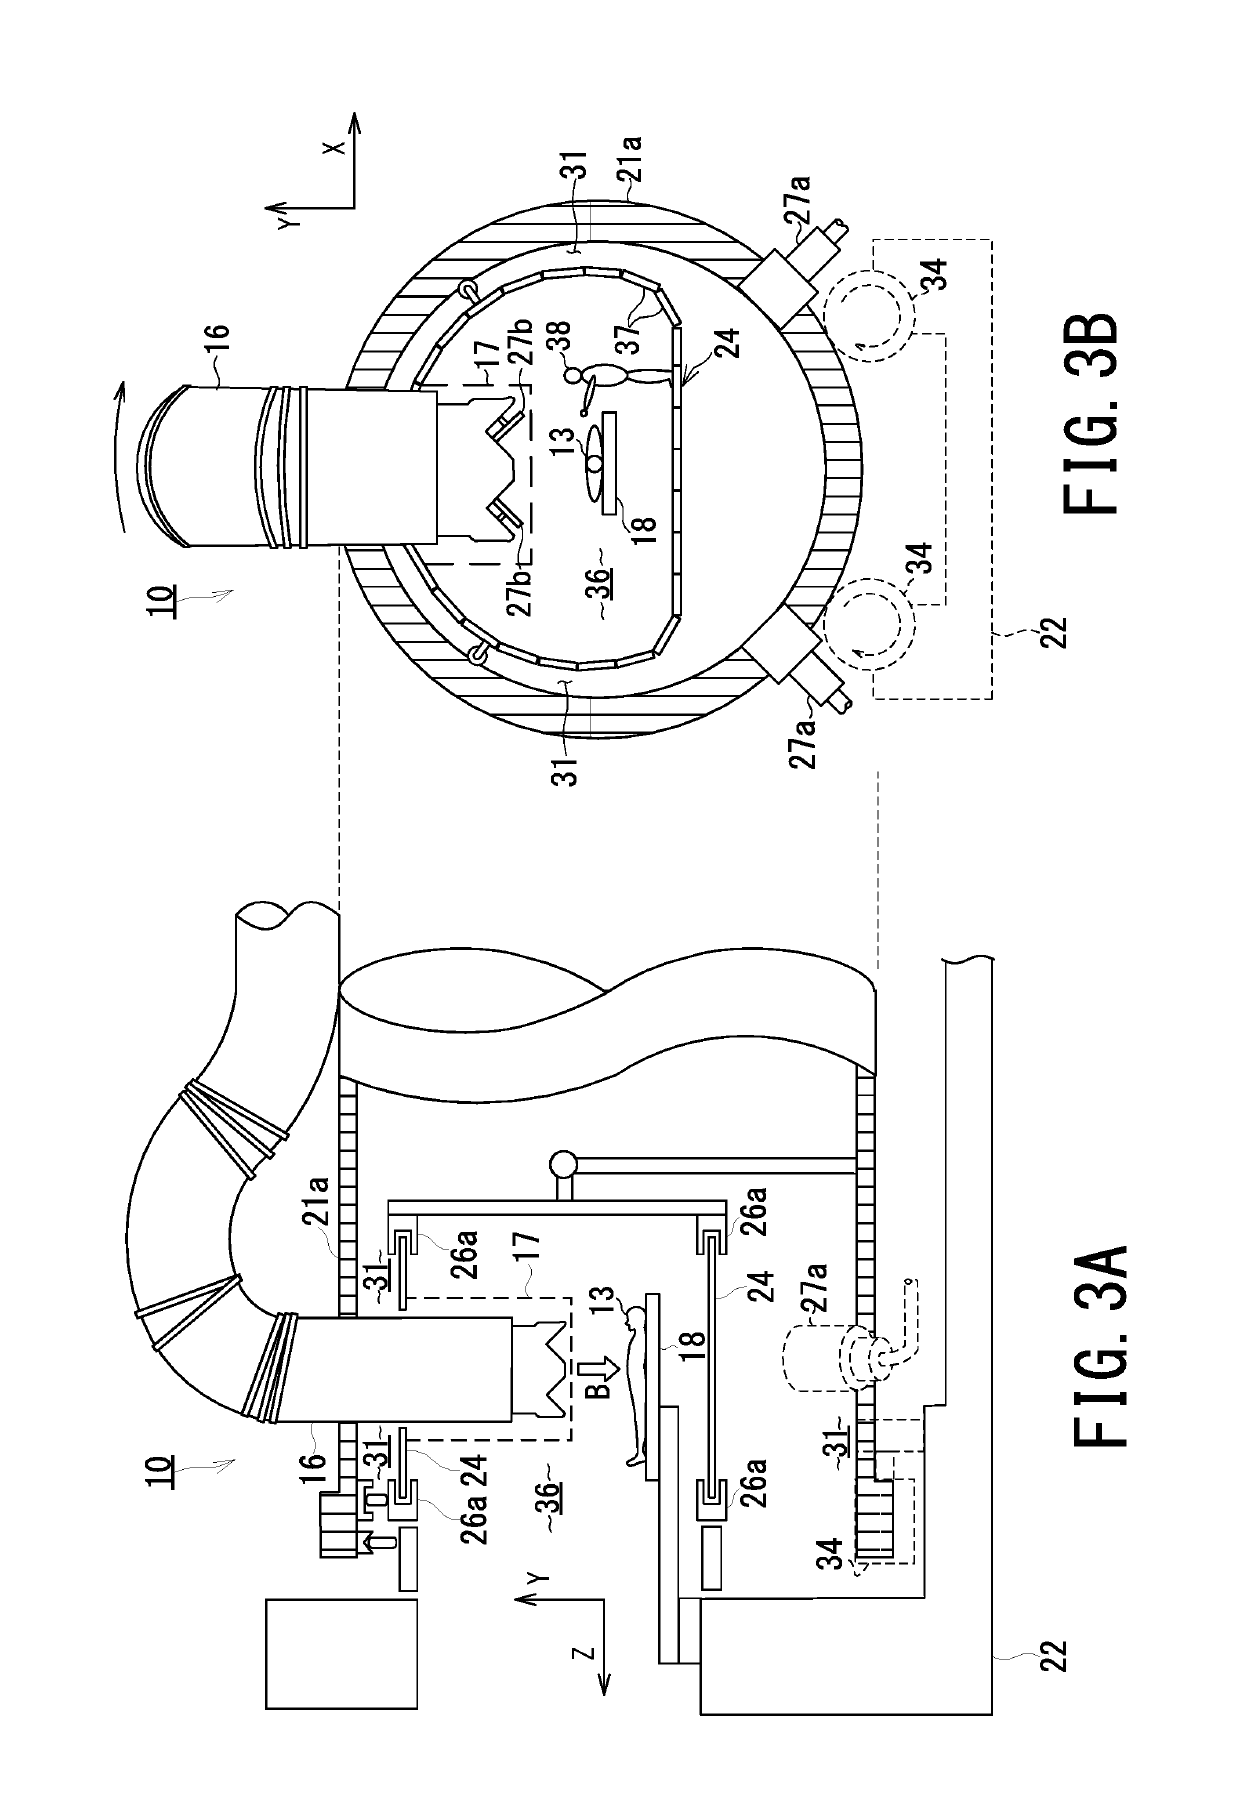 Particle beam therapy apparatus